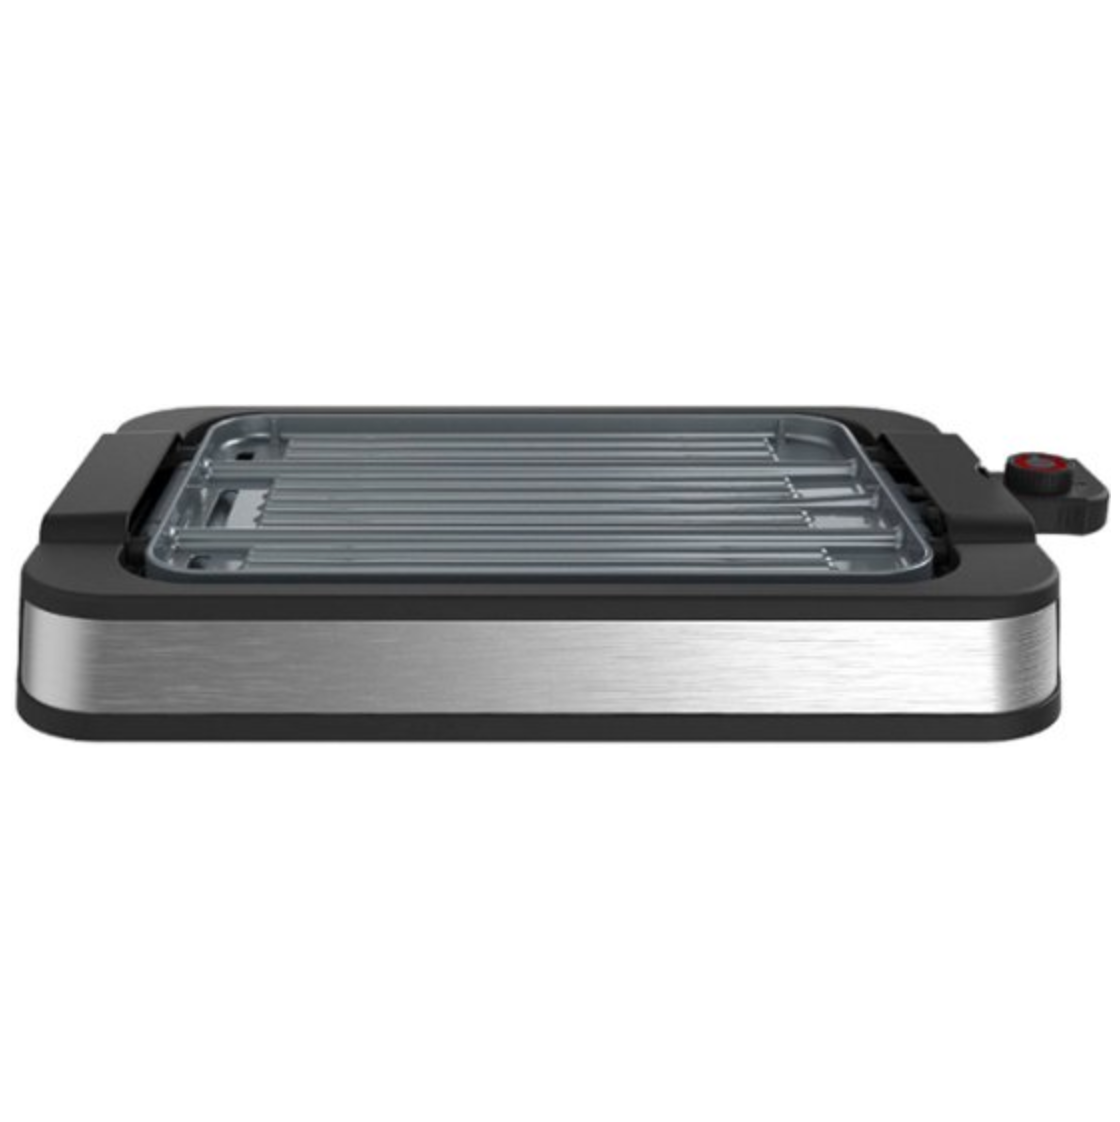 http://clarkdeals.com/wp-content/uploads/2022/03/Tristar-PowerXL-Indoor-Grill-and-Griddle-stainless-steel.png